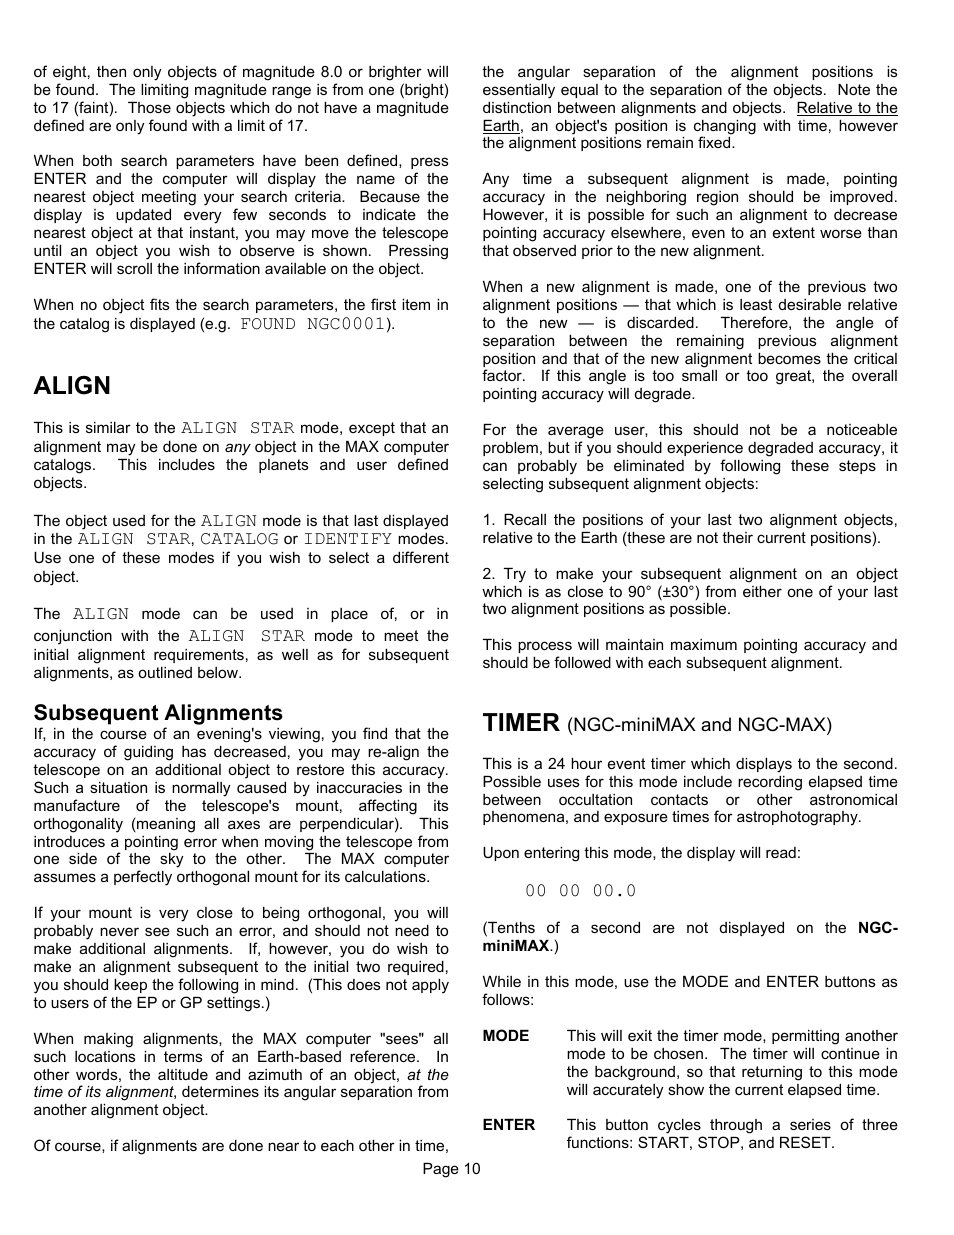 Align, Timer, Subsequent alignments | JMI Telescopes MAX Computer User Manual | Page 10 / 16